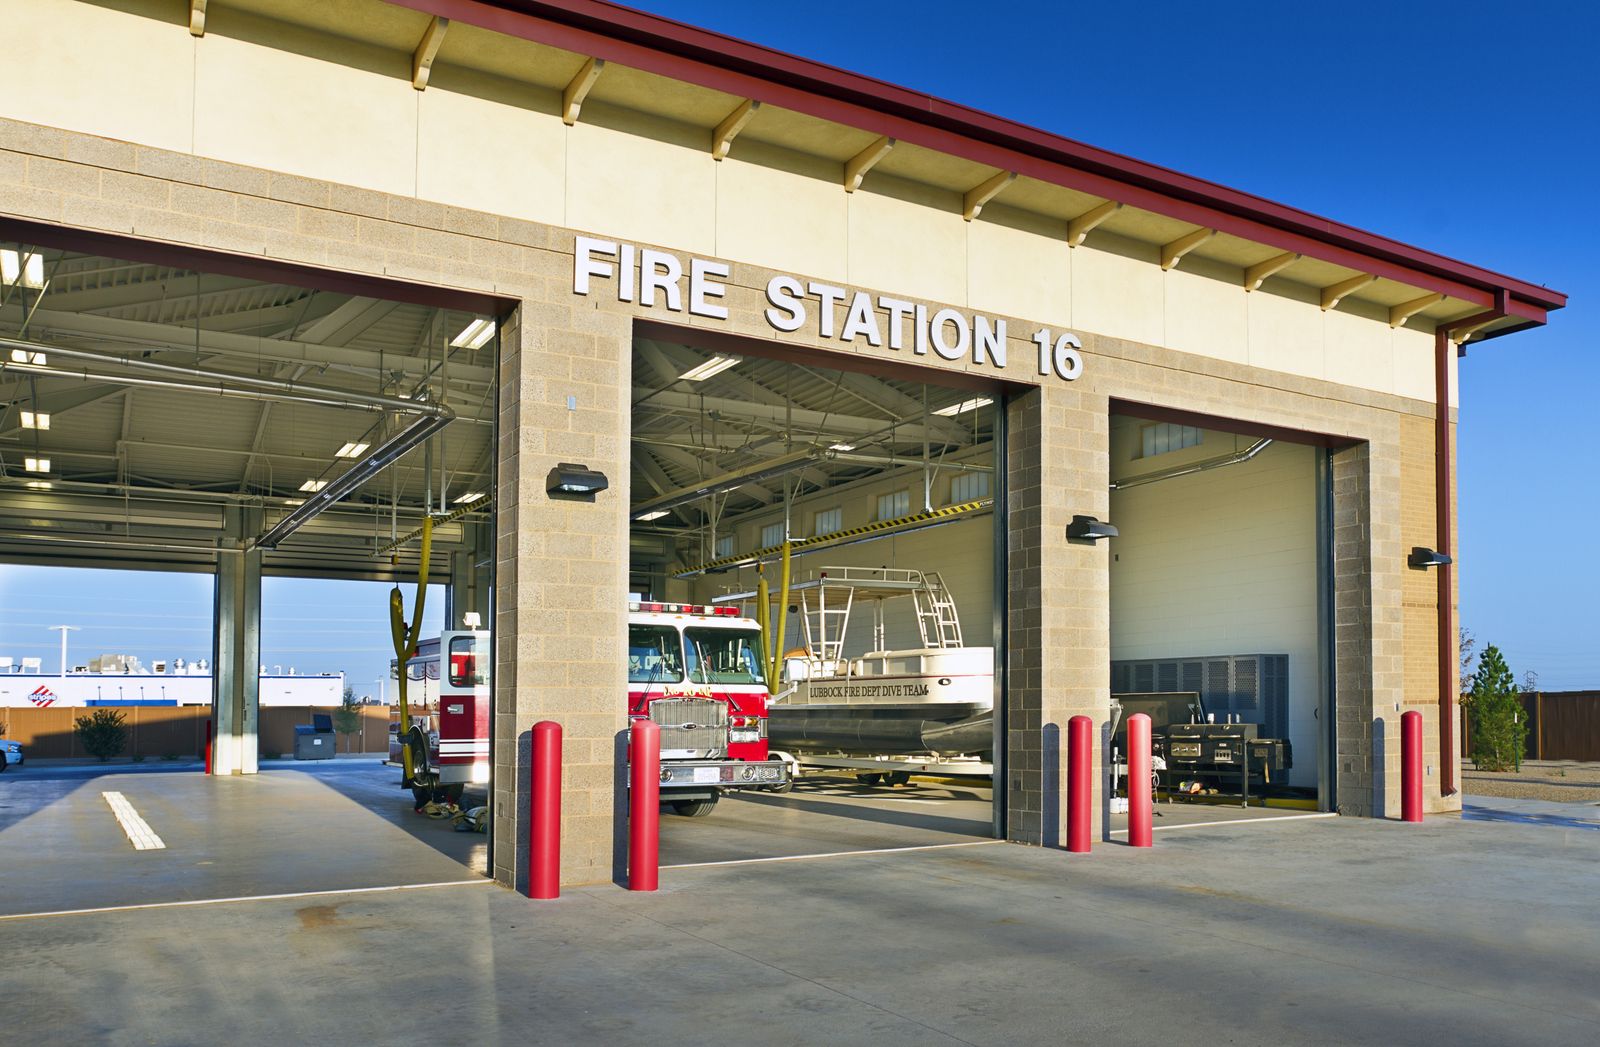  City of Lubbock | Fire Station No. 16 category